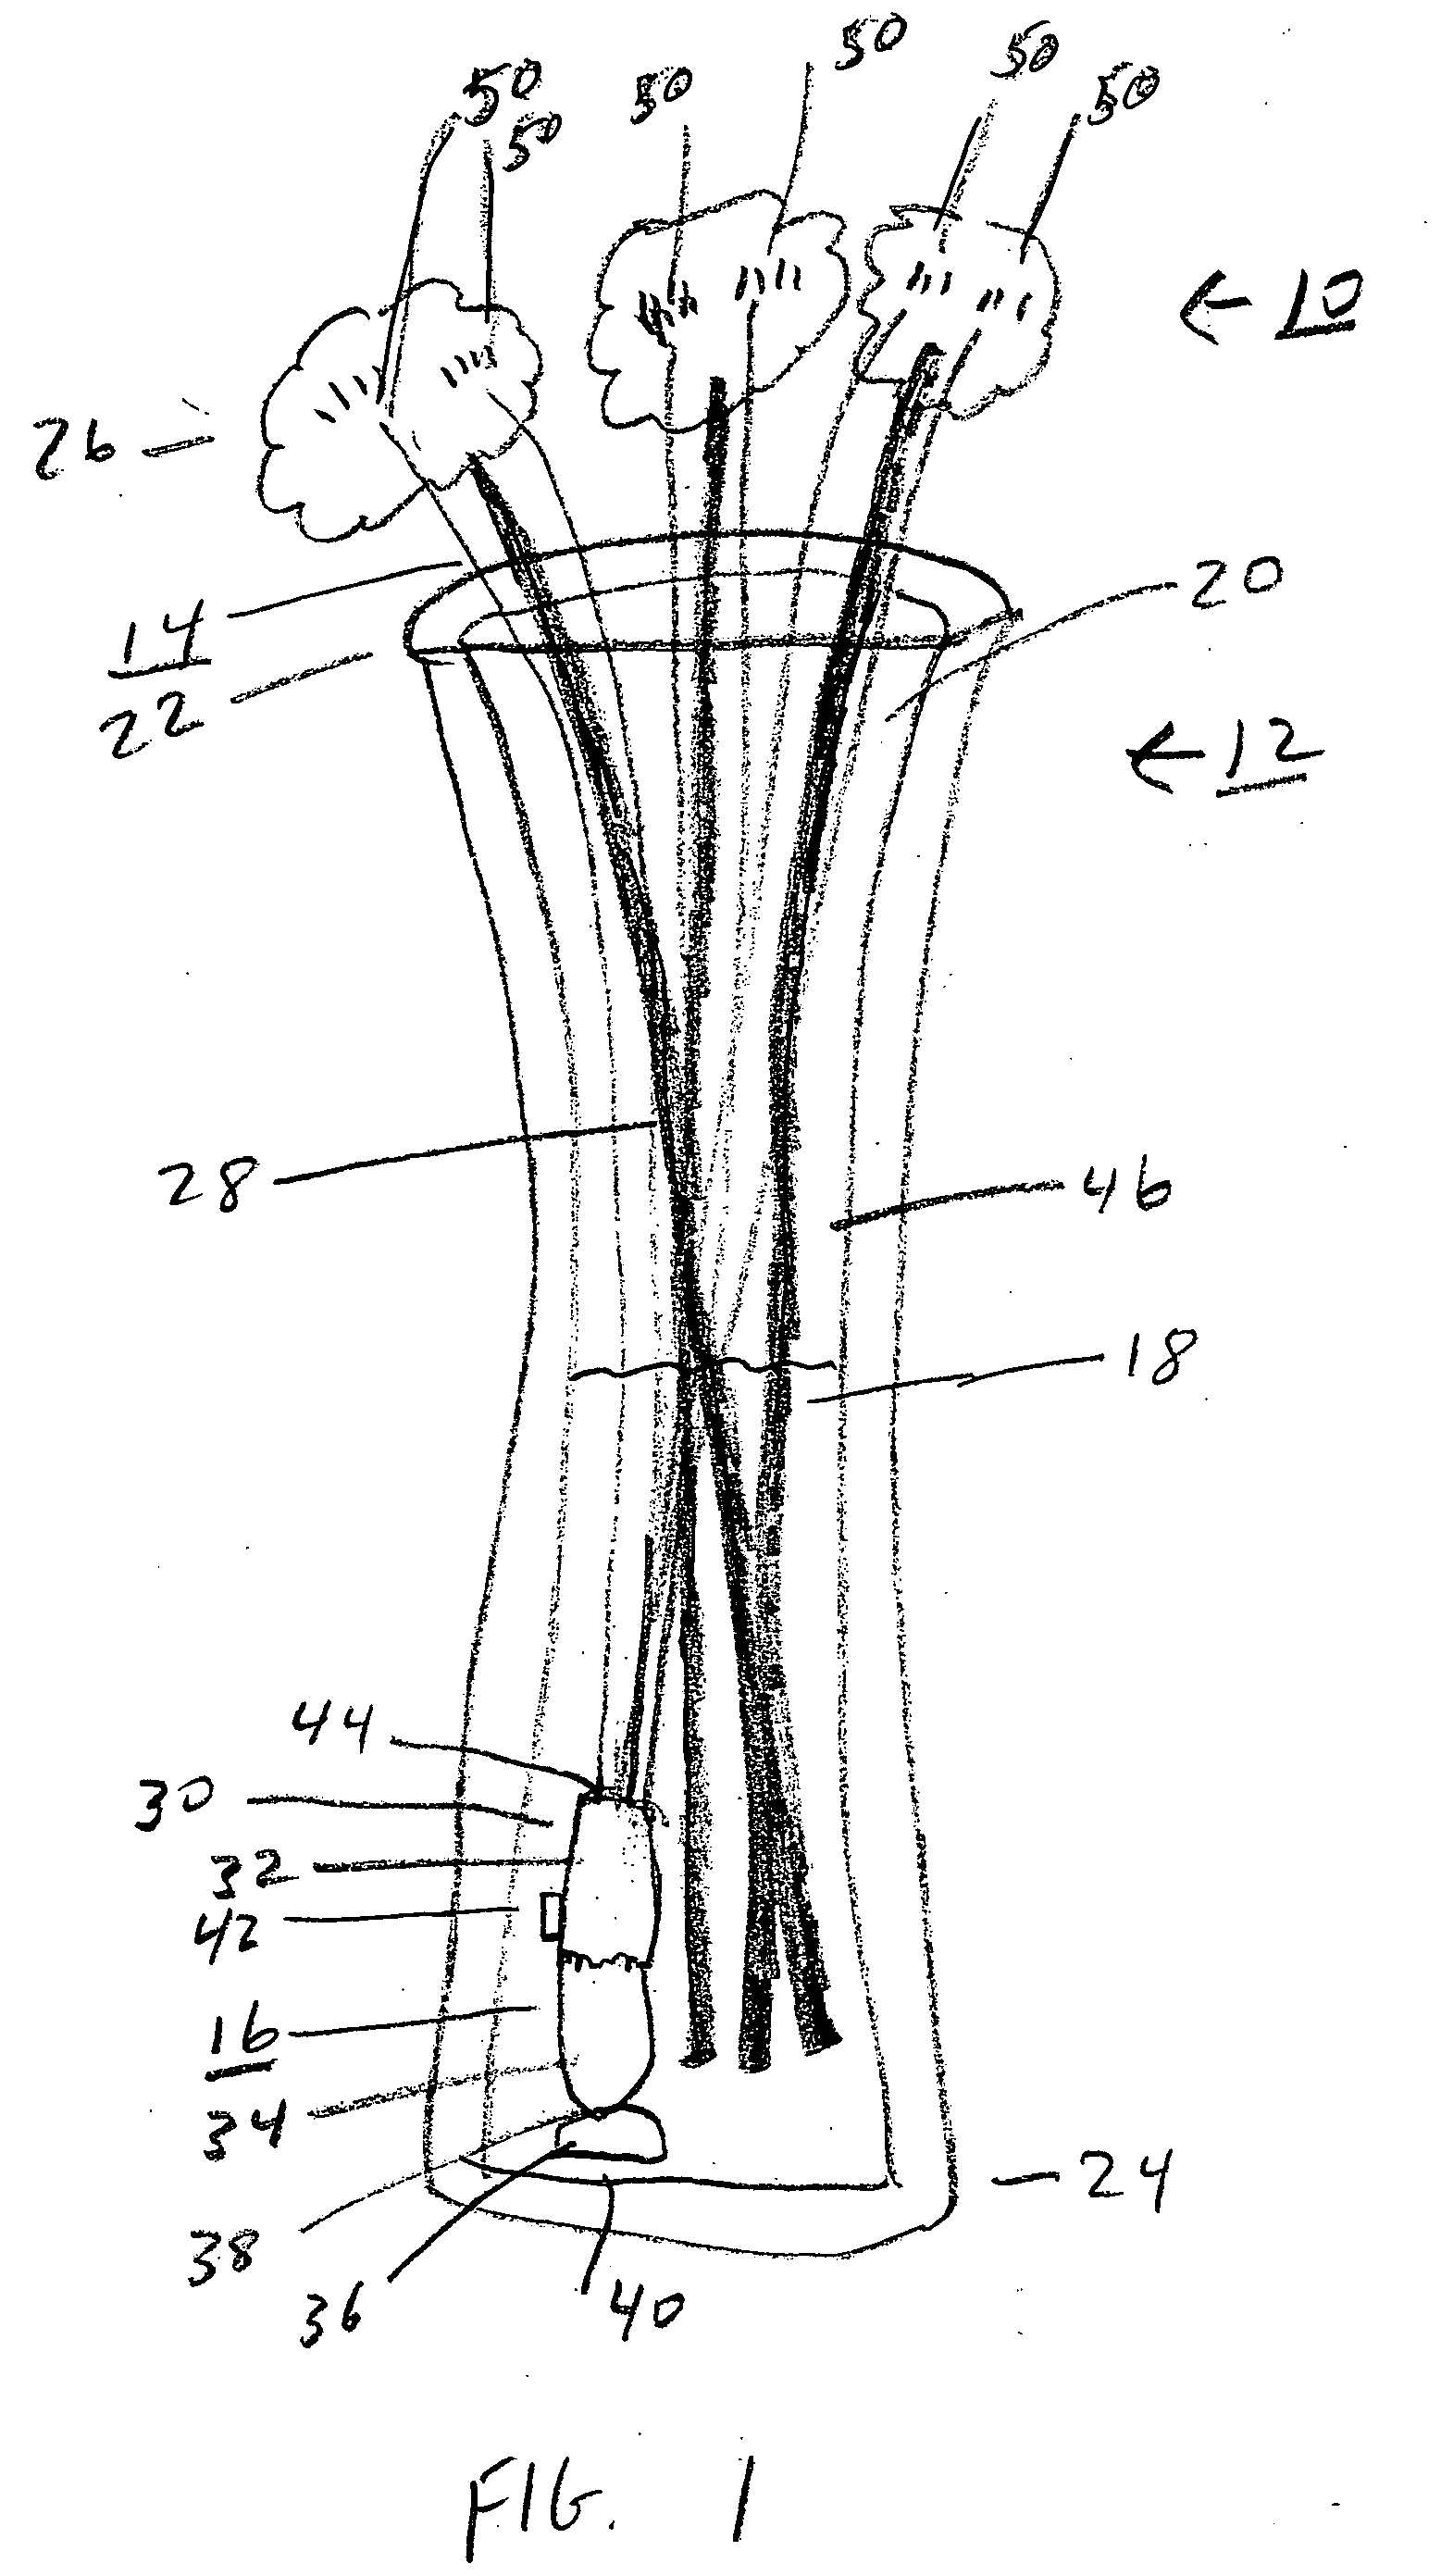 Submersible light source for an optical fiber flower display in a water-filled vase